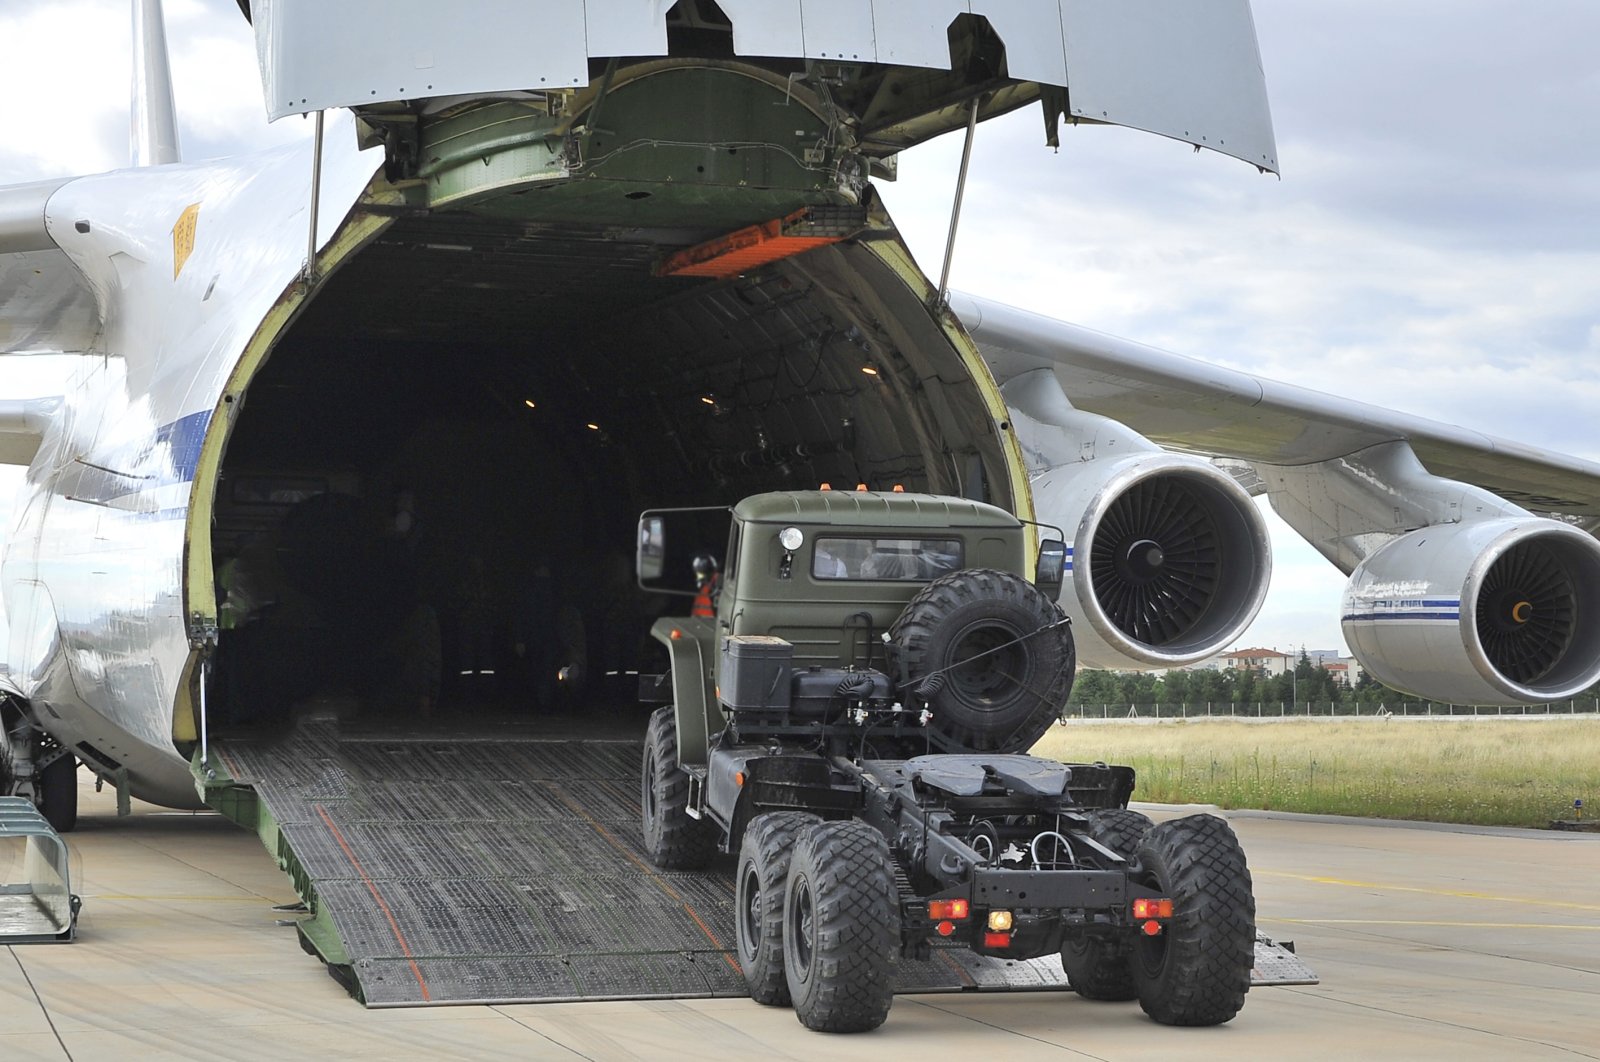 Military vehicles, equipment and parts of the S-400 air defense systems are unloaded from a Russian transport aircraft, at Mürted military airport in Ankara, Turkey, July 12, 2019. (AP Photo)